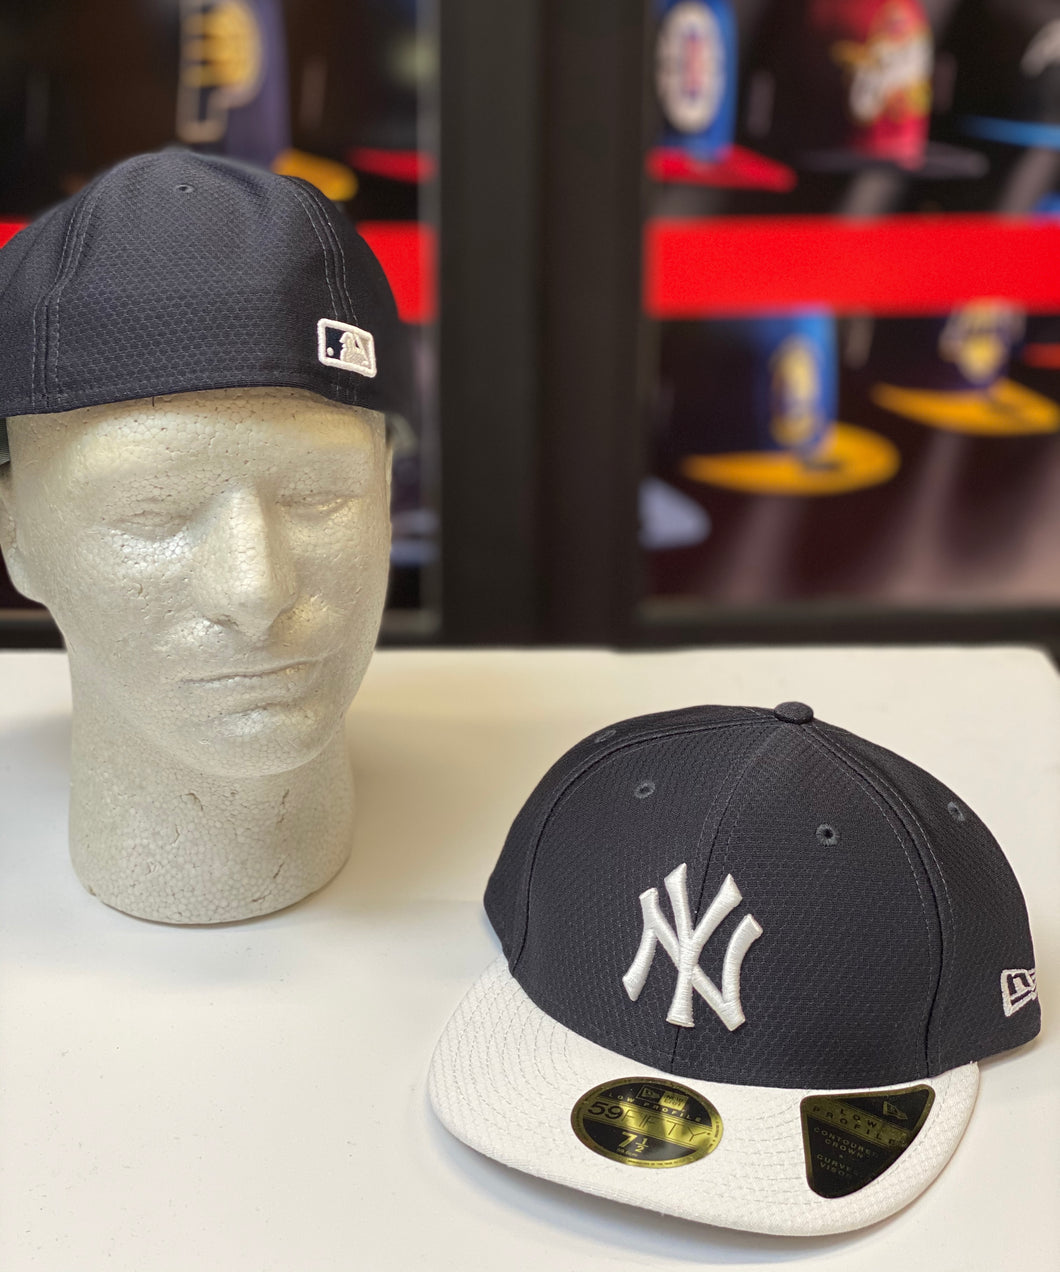 NEW YORK YANKEES CONTOURED CROWN NEW ERA FITTED